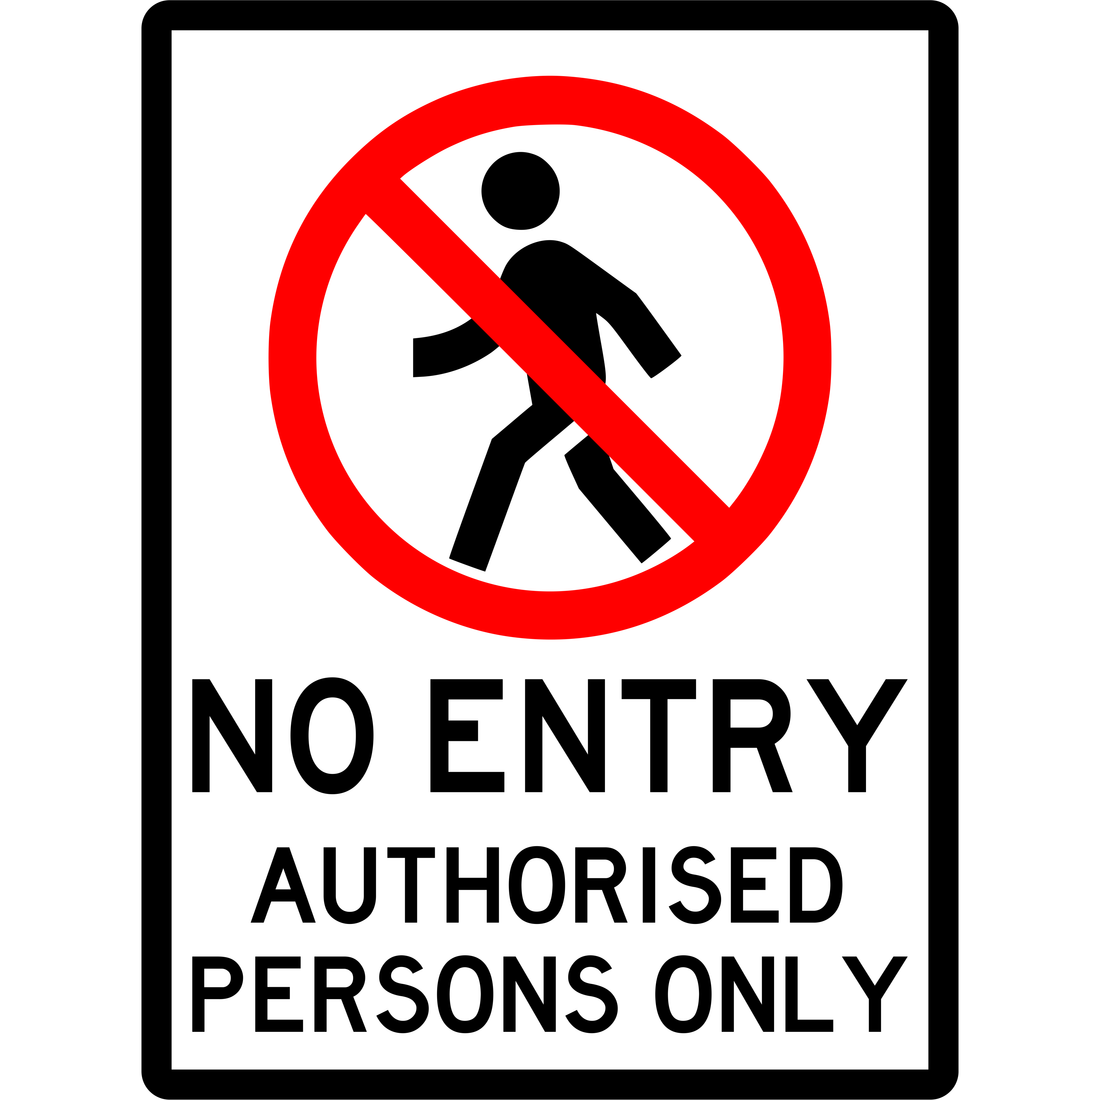 PROHIBITION - NO ENTRY AUTHORISED PERSONS ONLY